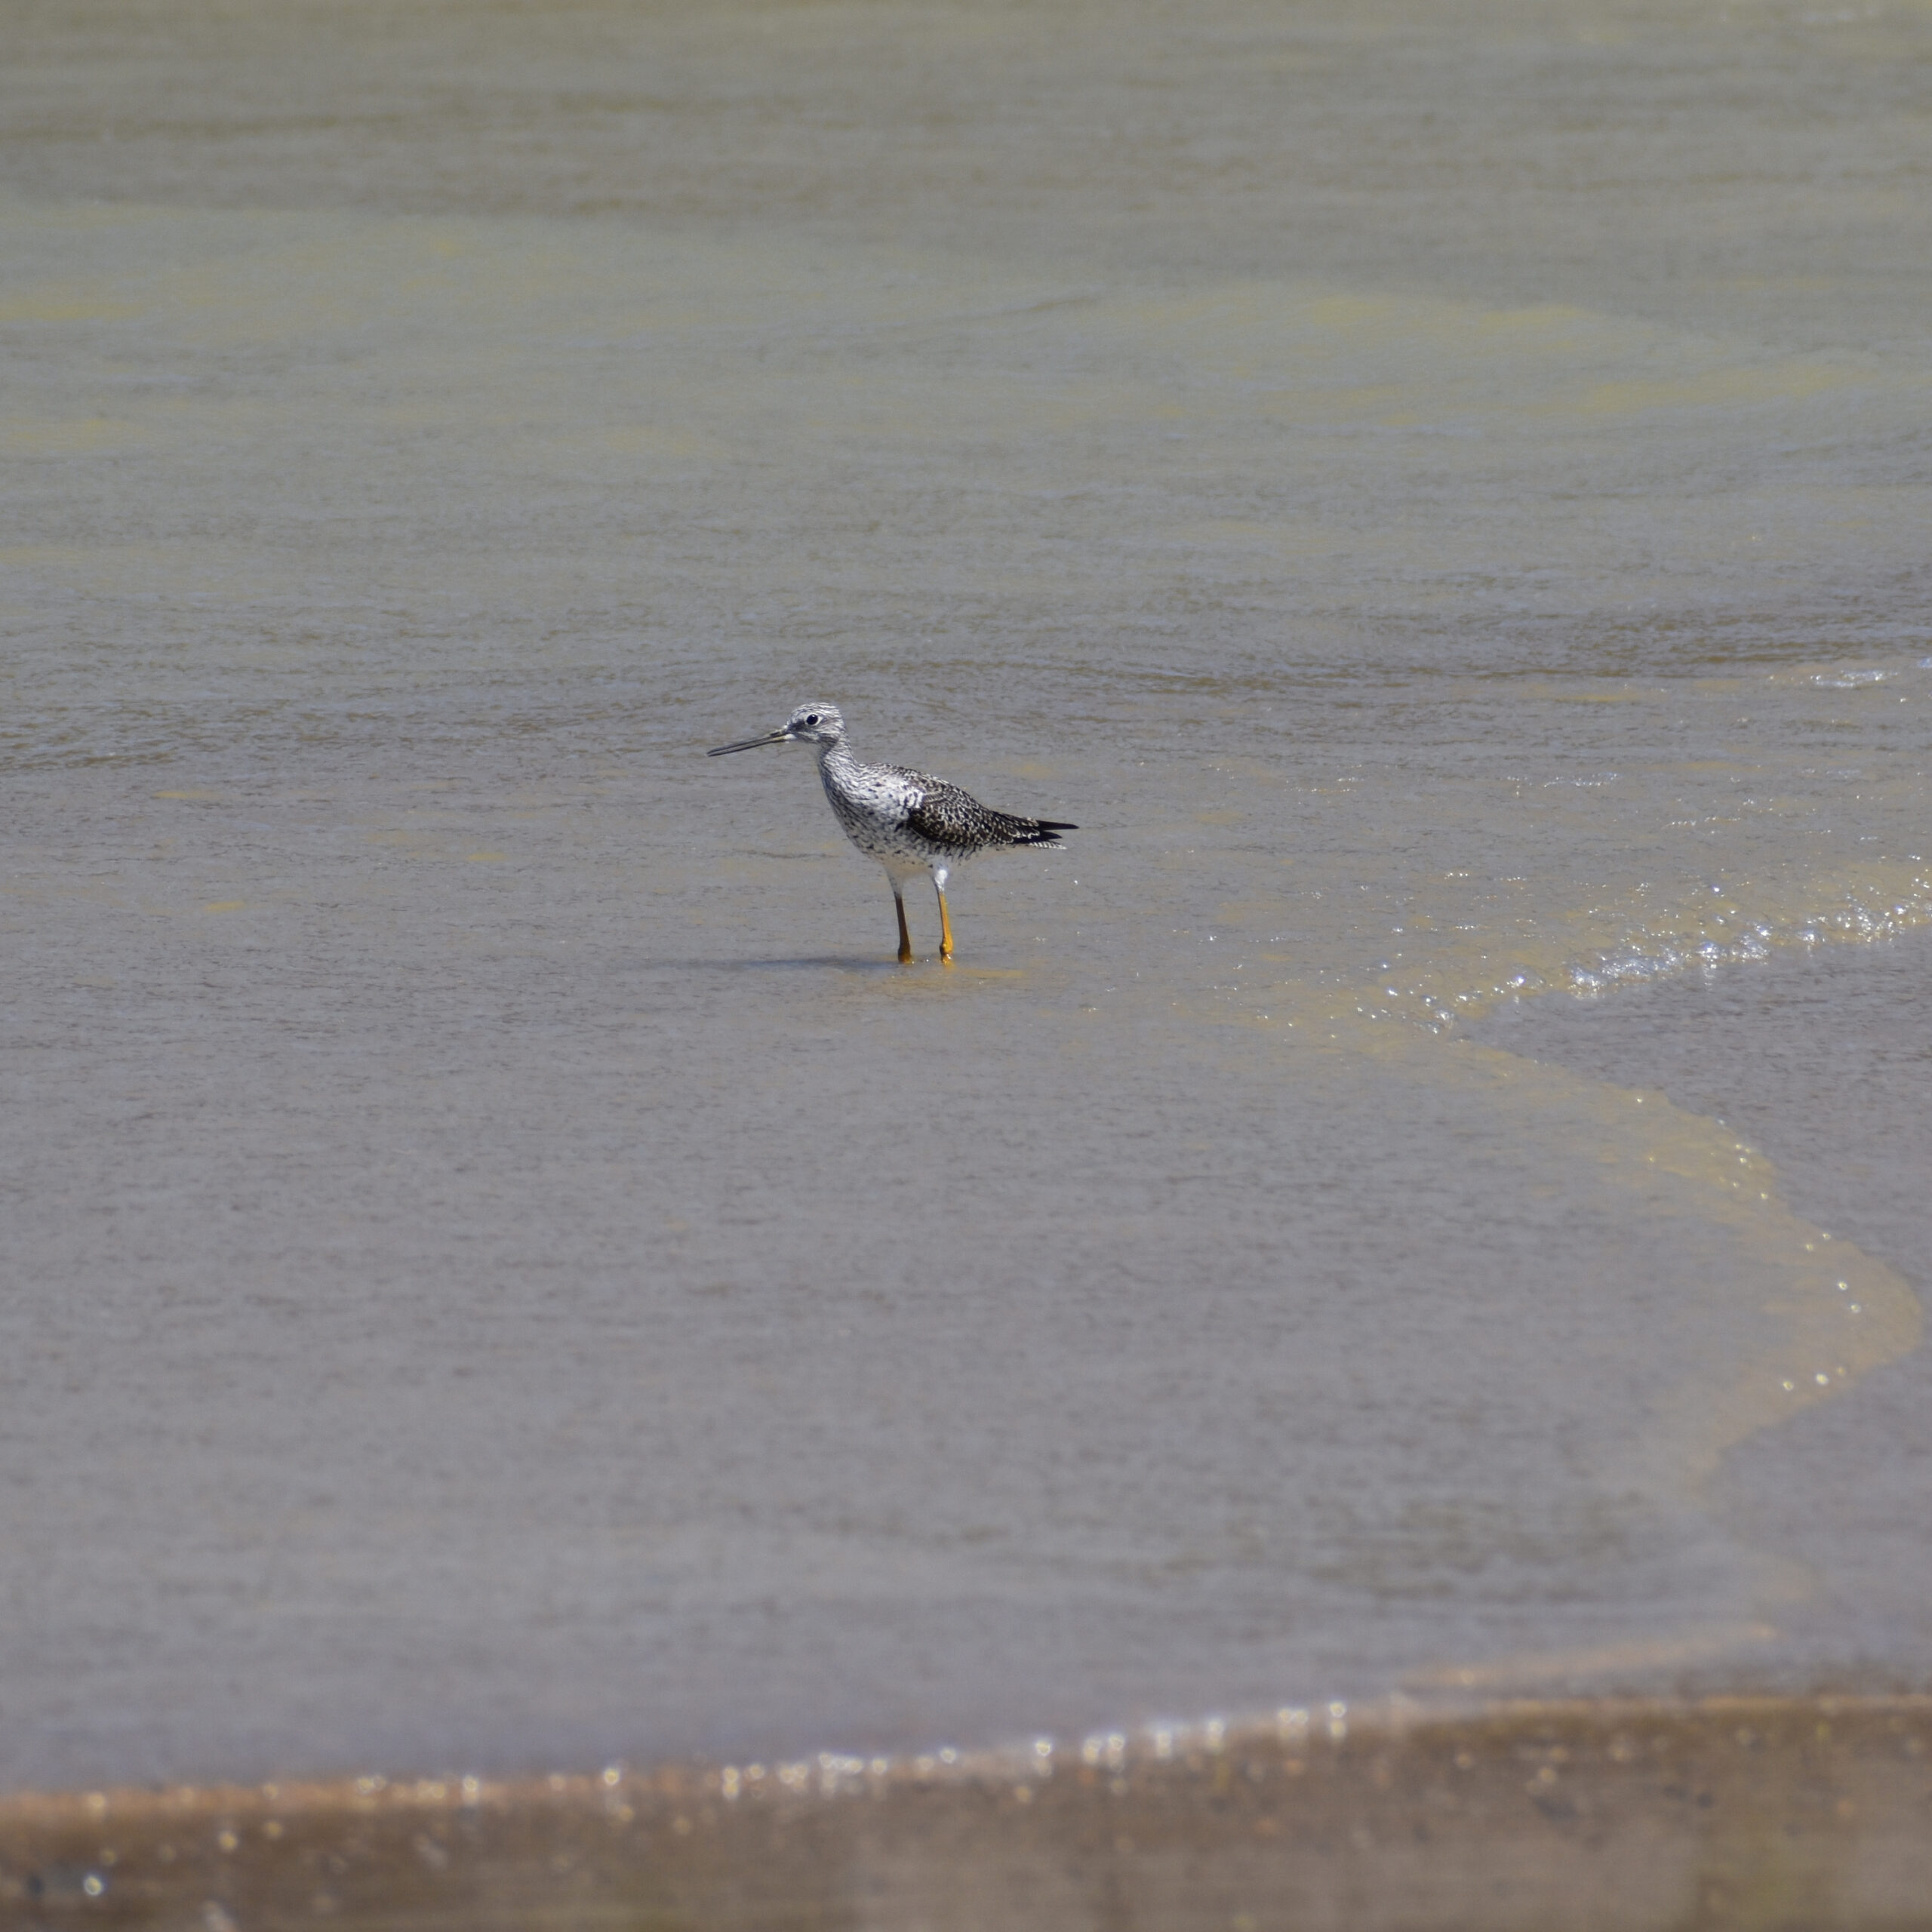 A bird with a long grey beak, gray spotted body and darker spotted wings, and long yellow legs stands in shallow water on the sandy shore.